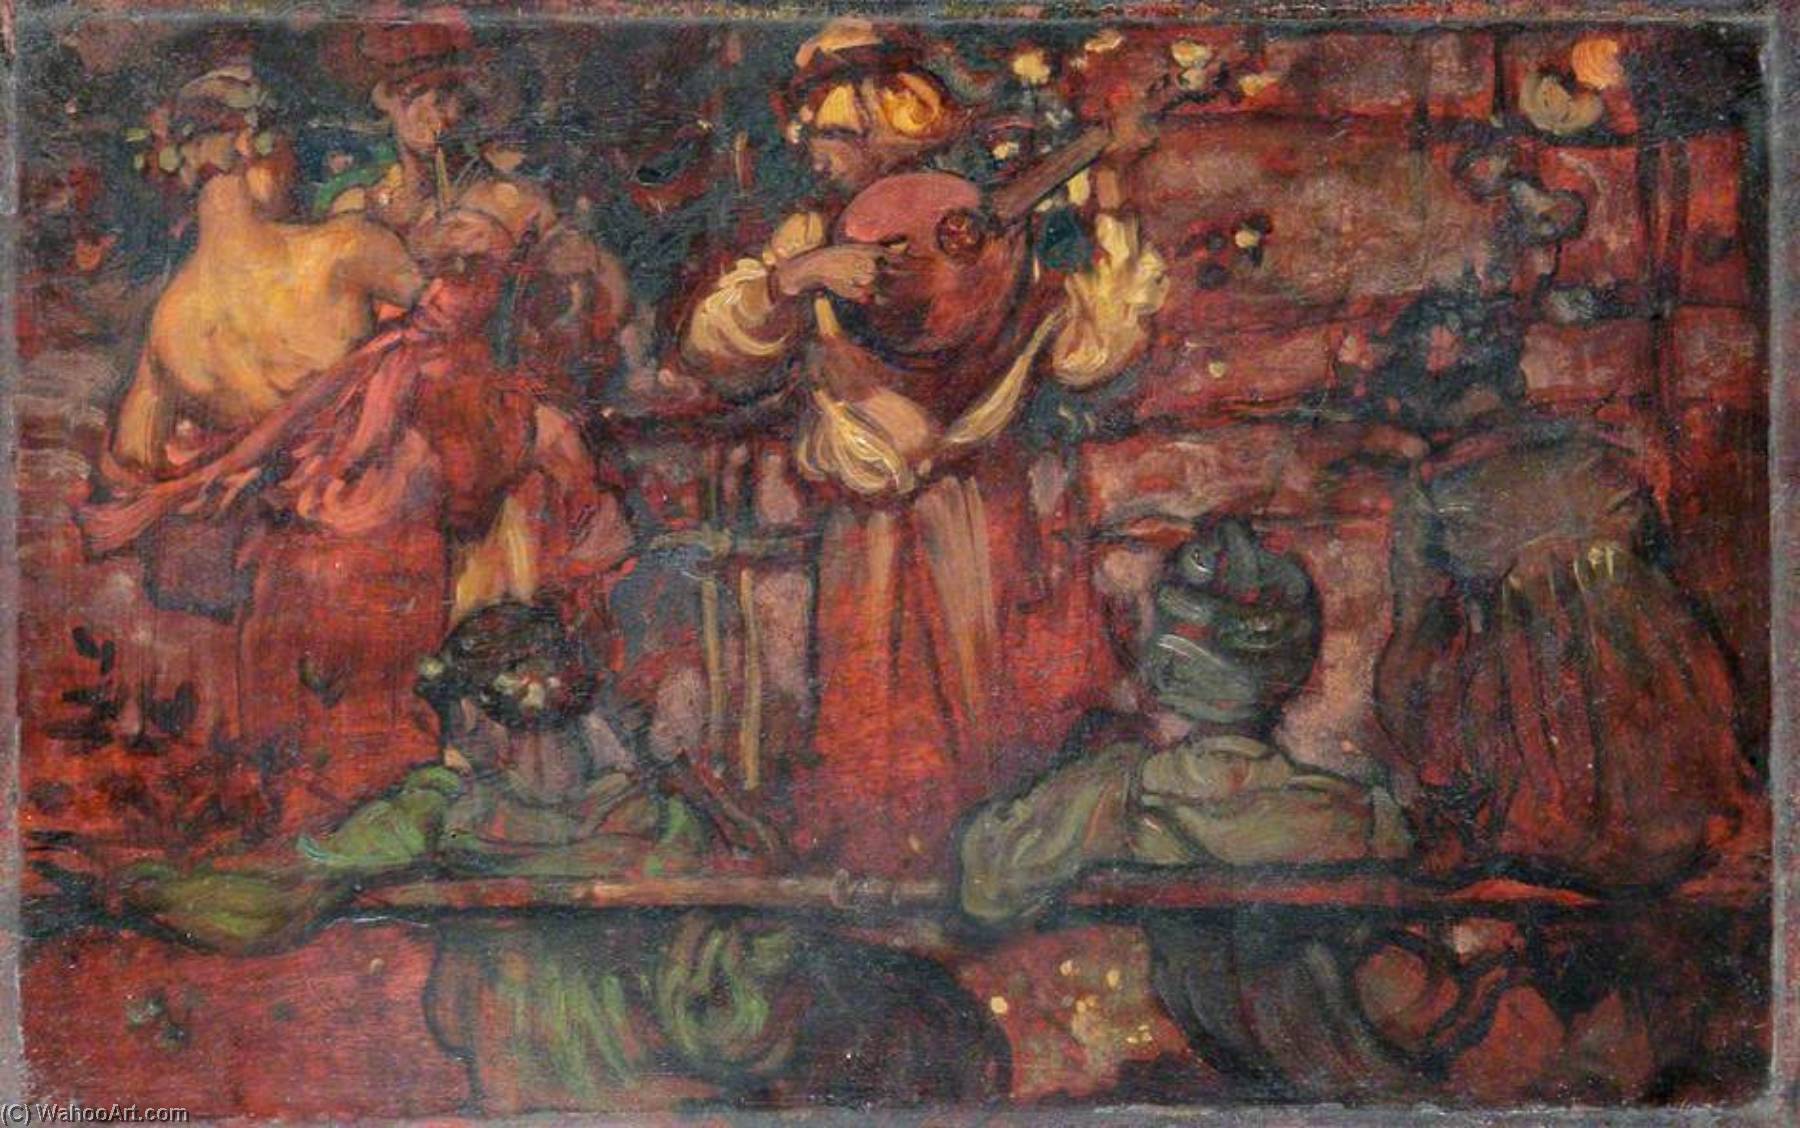 Group Listening to Musicians, 1902 by Frank William Brangwyn Frank William Brangwyn | ArtsDot.com